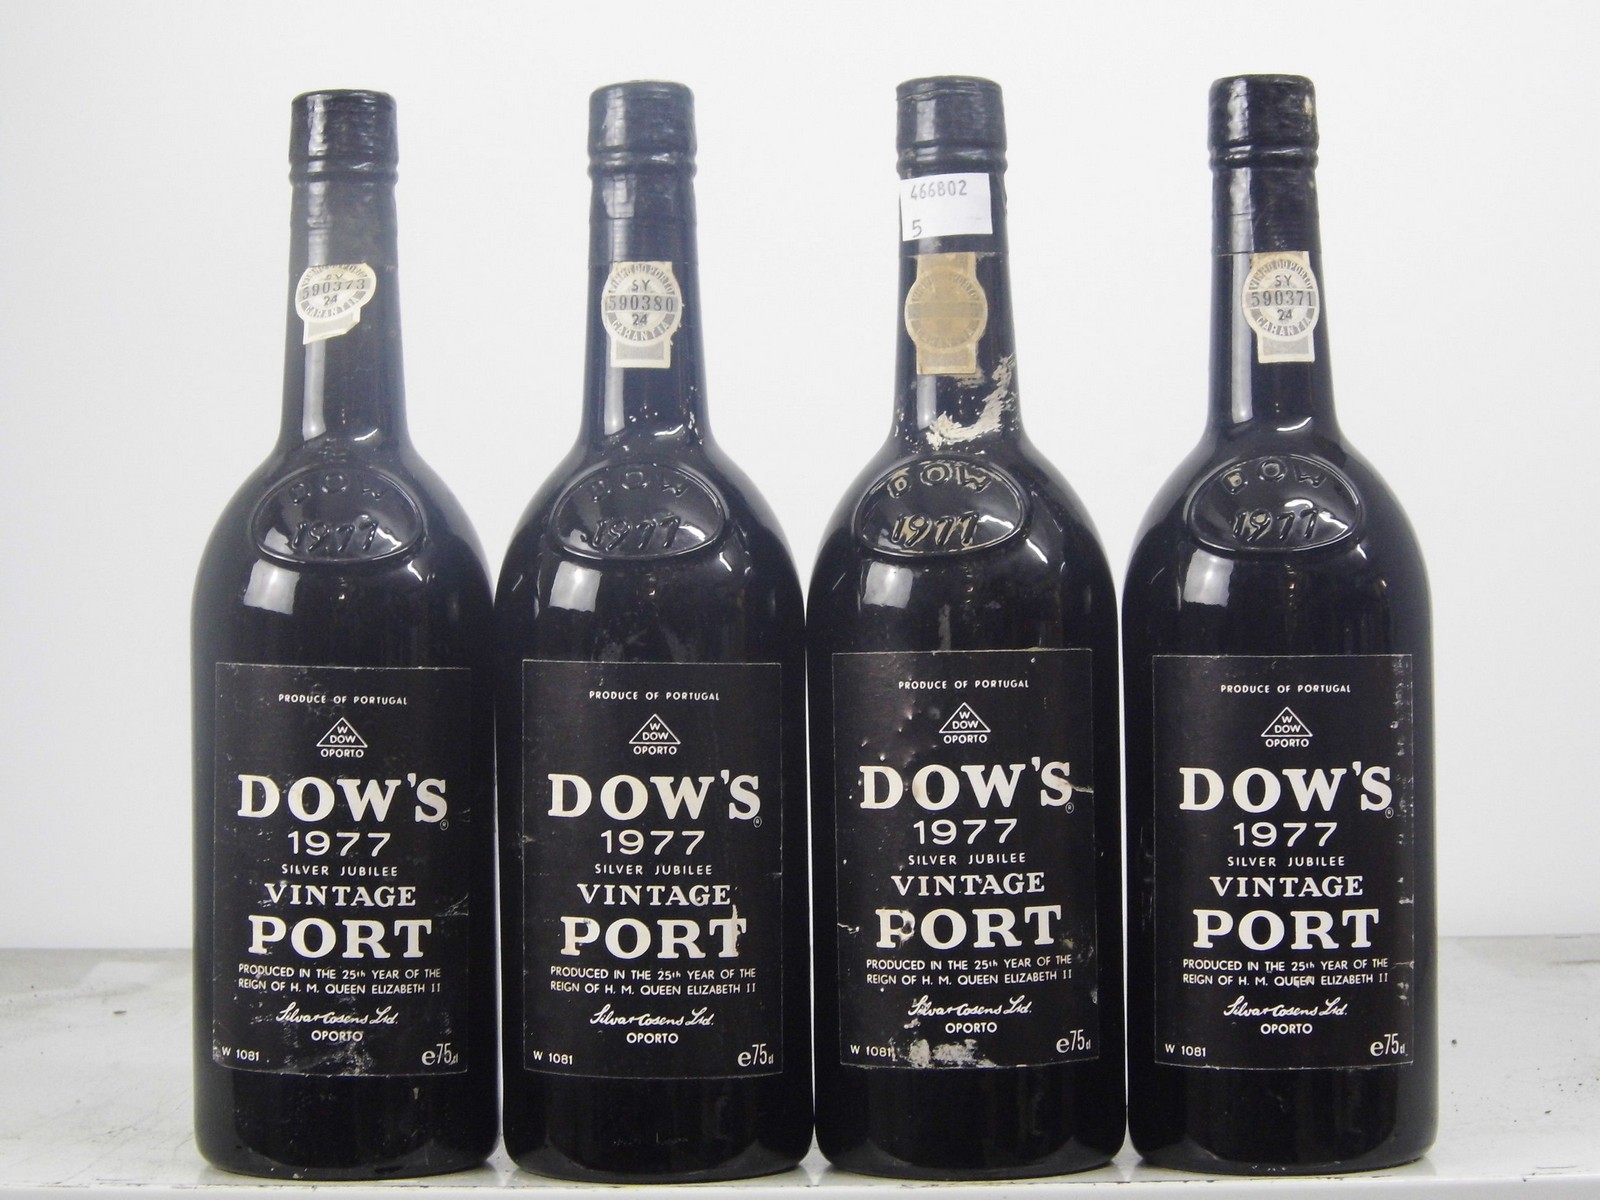 Dow's Vintage Port 1977 8 bts  Dow's Vintage Port 1977  8 bts - Image 2 of 2